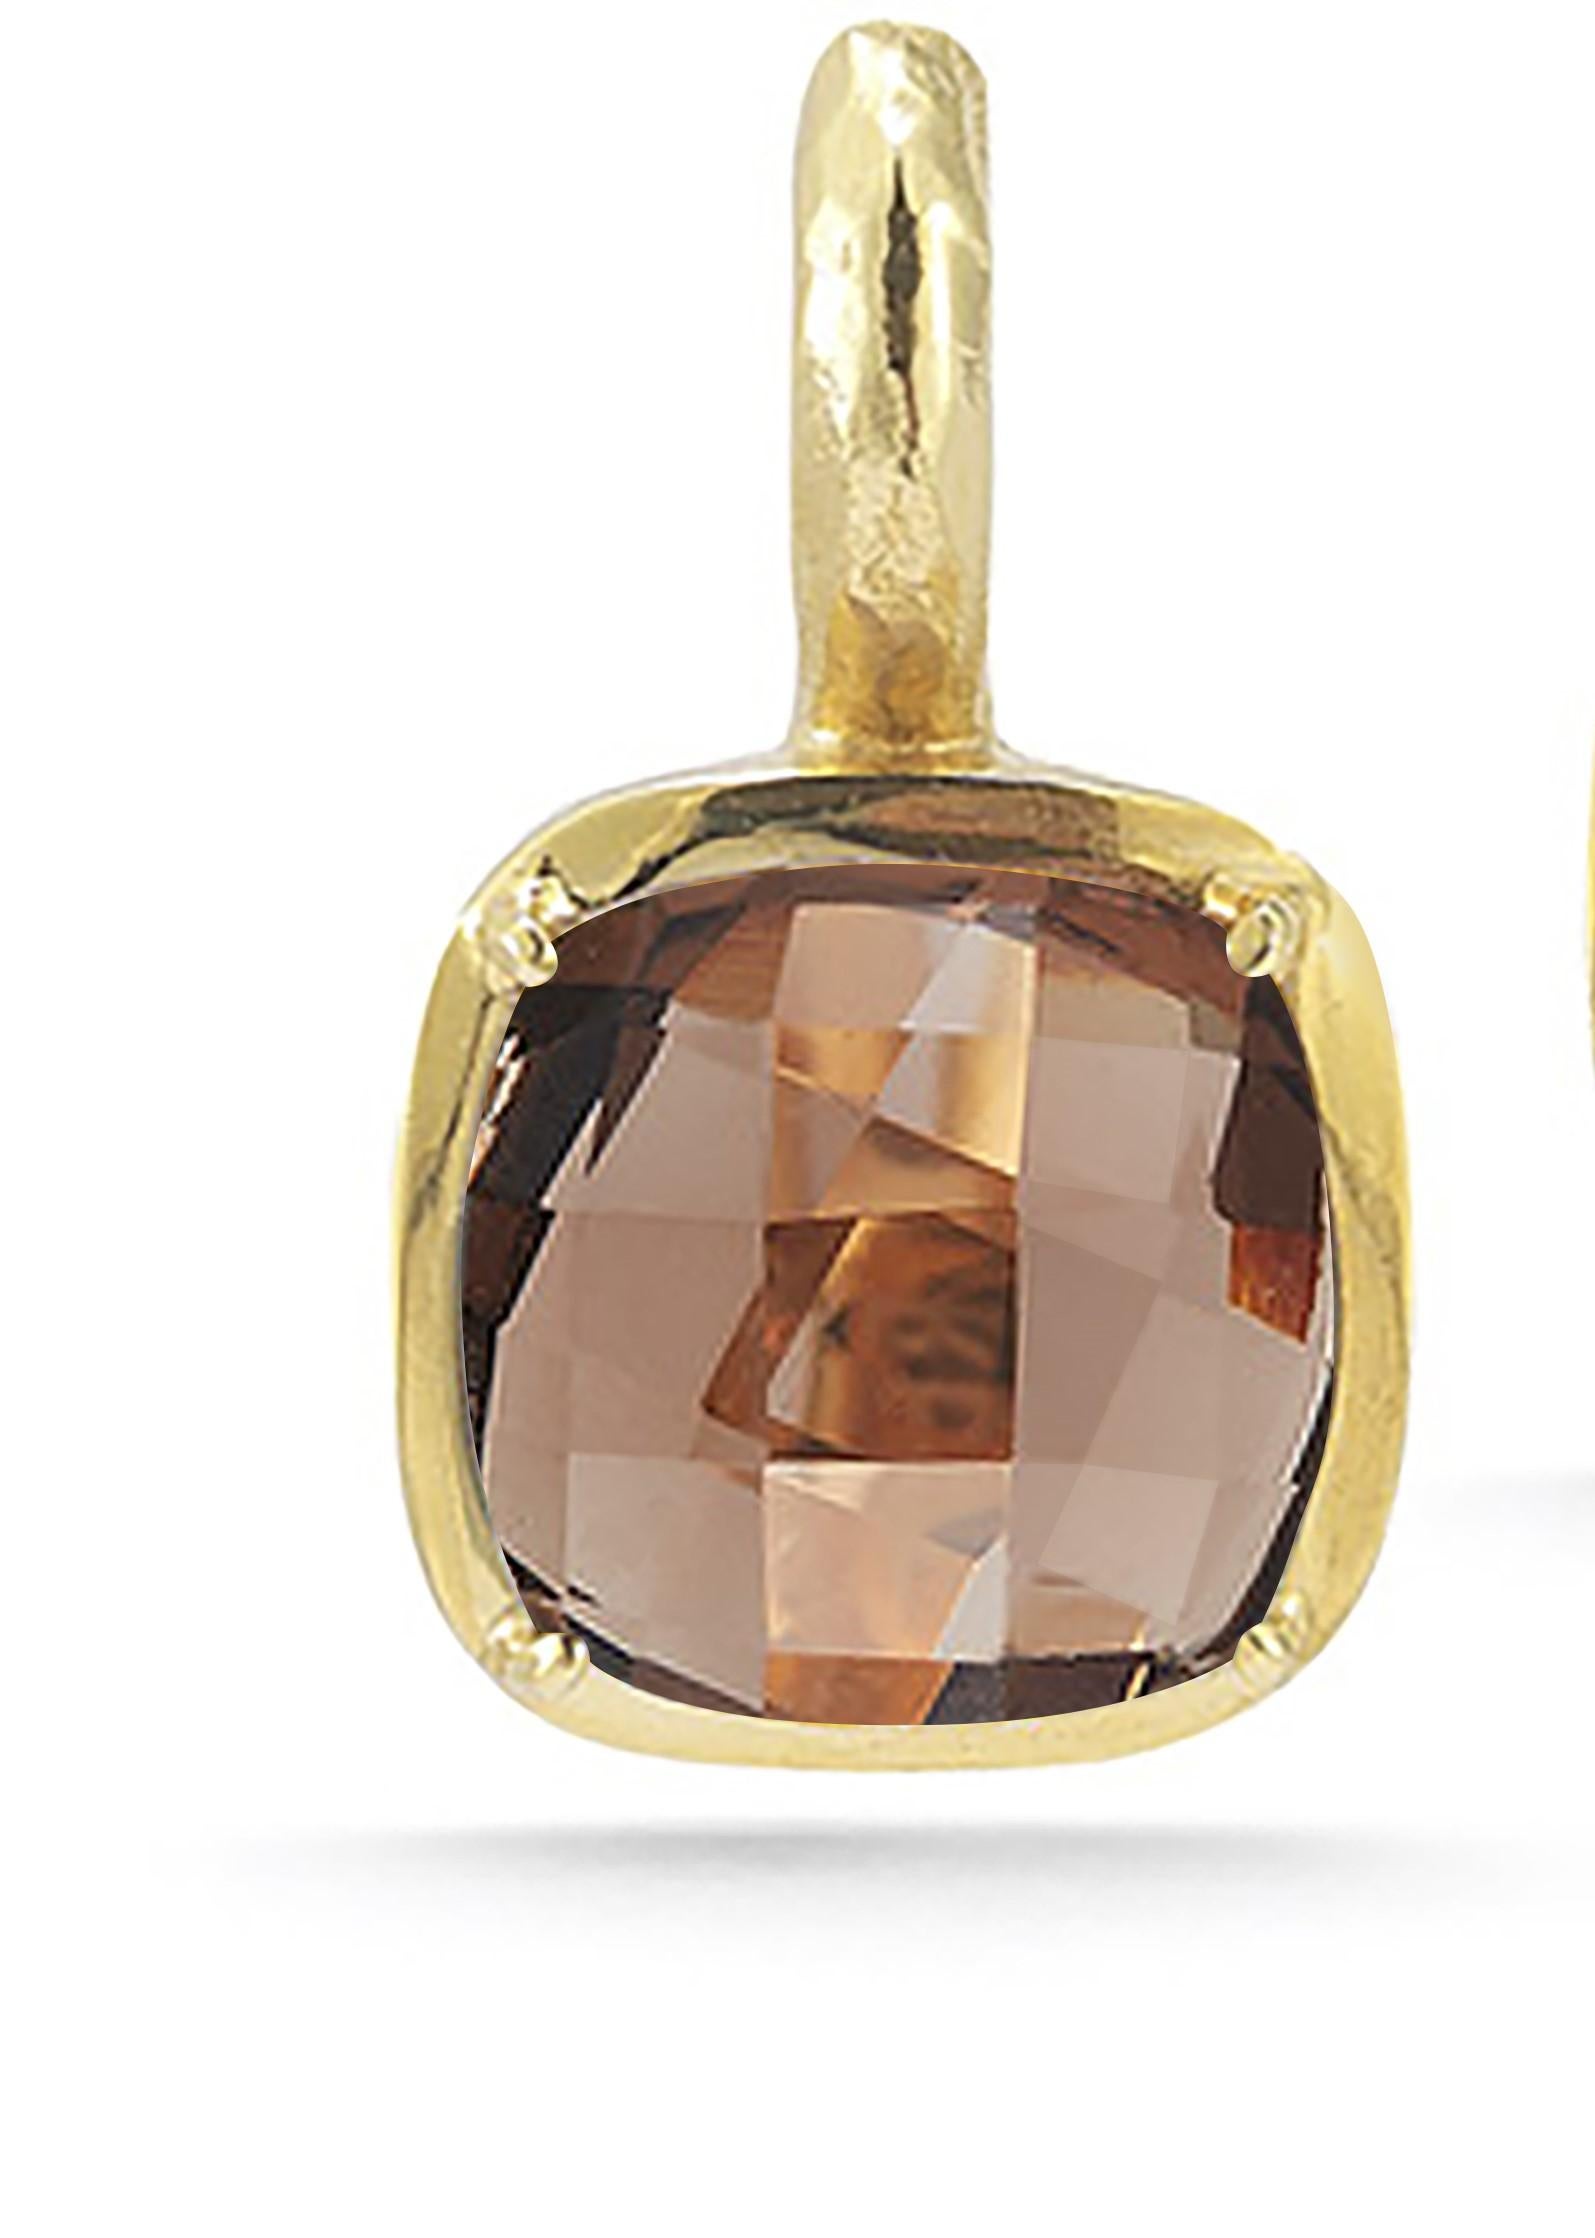 14 Karat Yellow Gold Matte and Hammer-Finished Drop Earrings, Centered with a 10mm 7.0CT Checkerboard Cushion-Cut Smokey Topaz Semi-Precious Color Stone.
